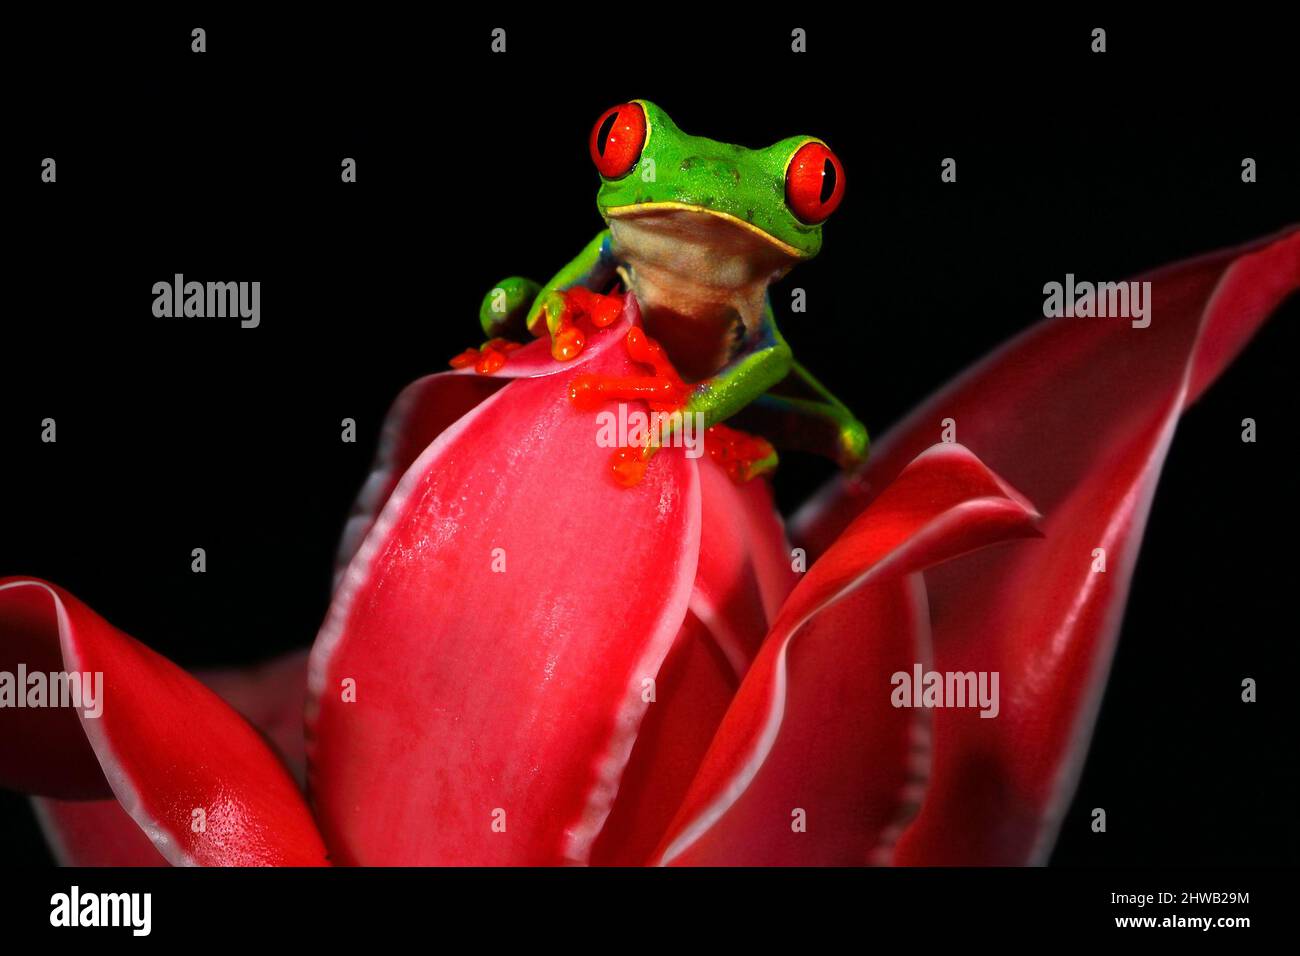 Beautiful amphibian in the night forest, exotic animal from America on red bloom of flower. Red-eyed Tree Frog, Agalychnis callidryas, animal with big Stock Photo